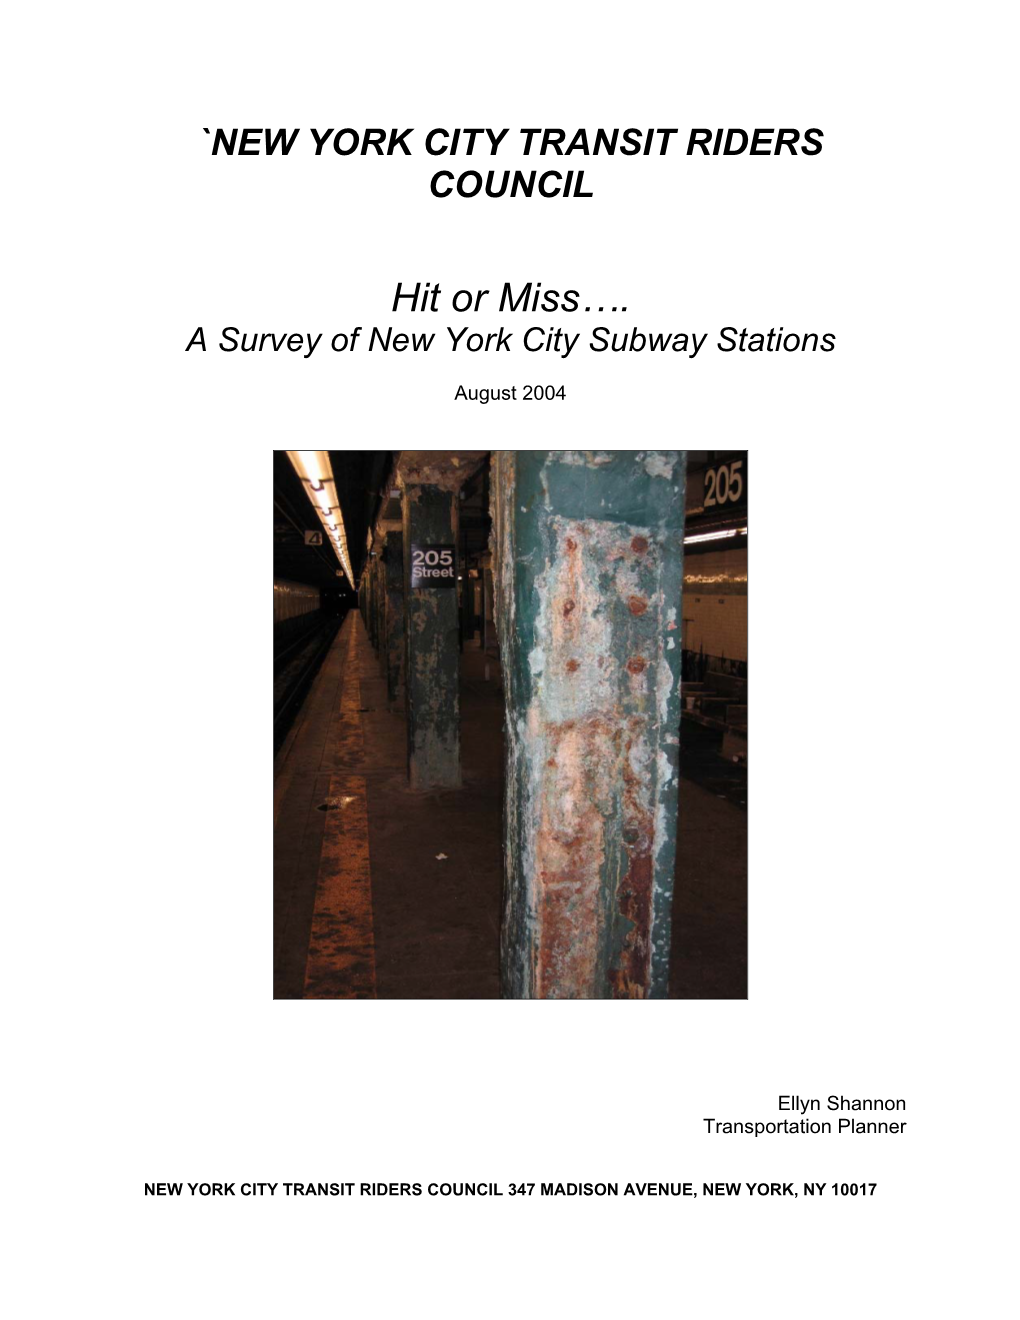 Hit Or Miss…. a Survey of New York City Subway Stations